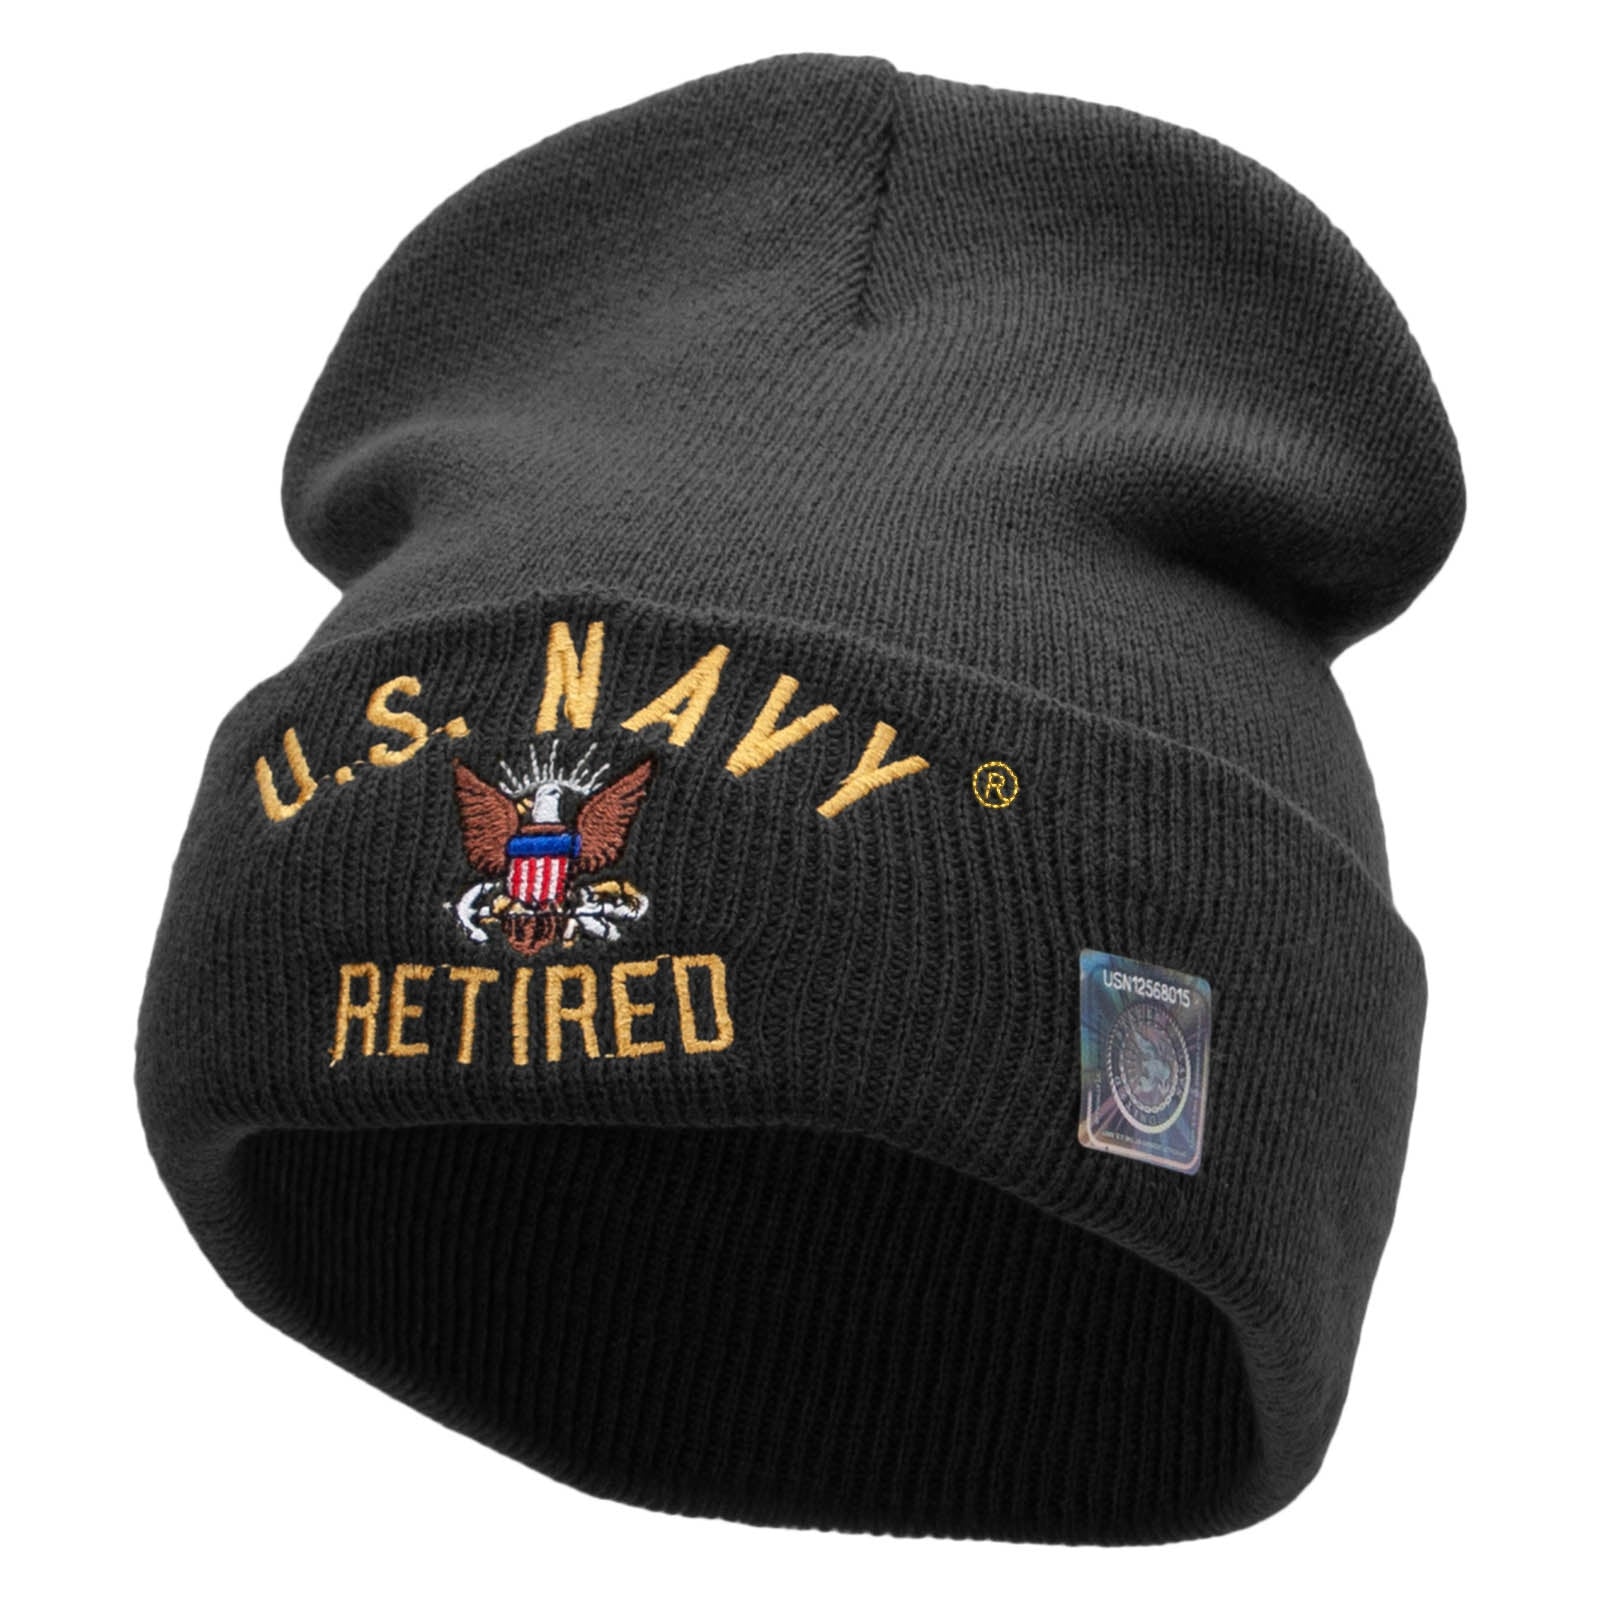 Licensed US Navy Retired Military Embroidered Long Beanie Made in USA - Black OSFM